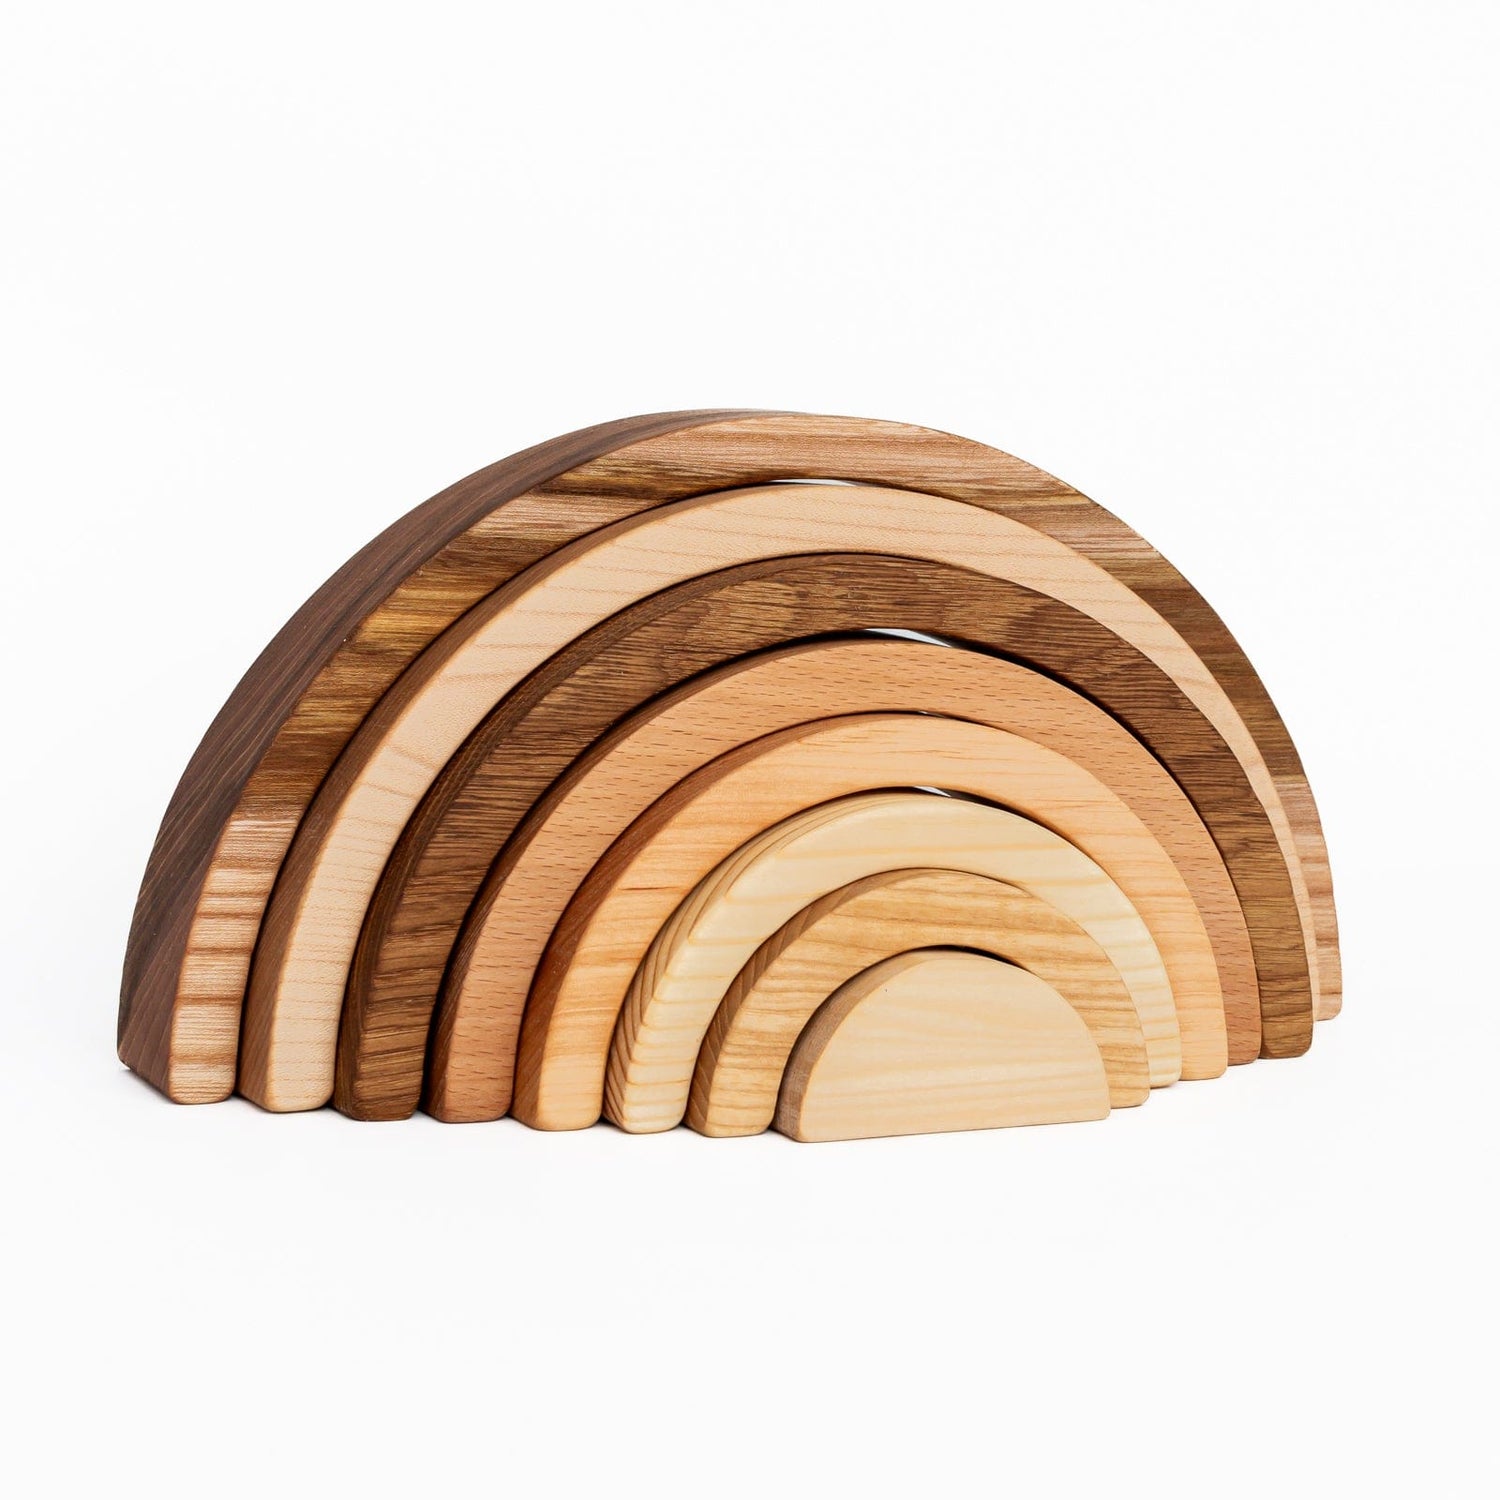 Aw & Co. Building & Stacking Multi-Wood Stacking Rainbow (8 pc)